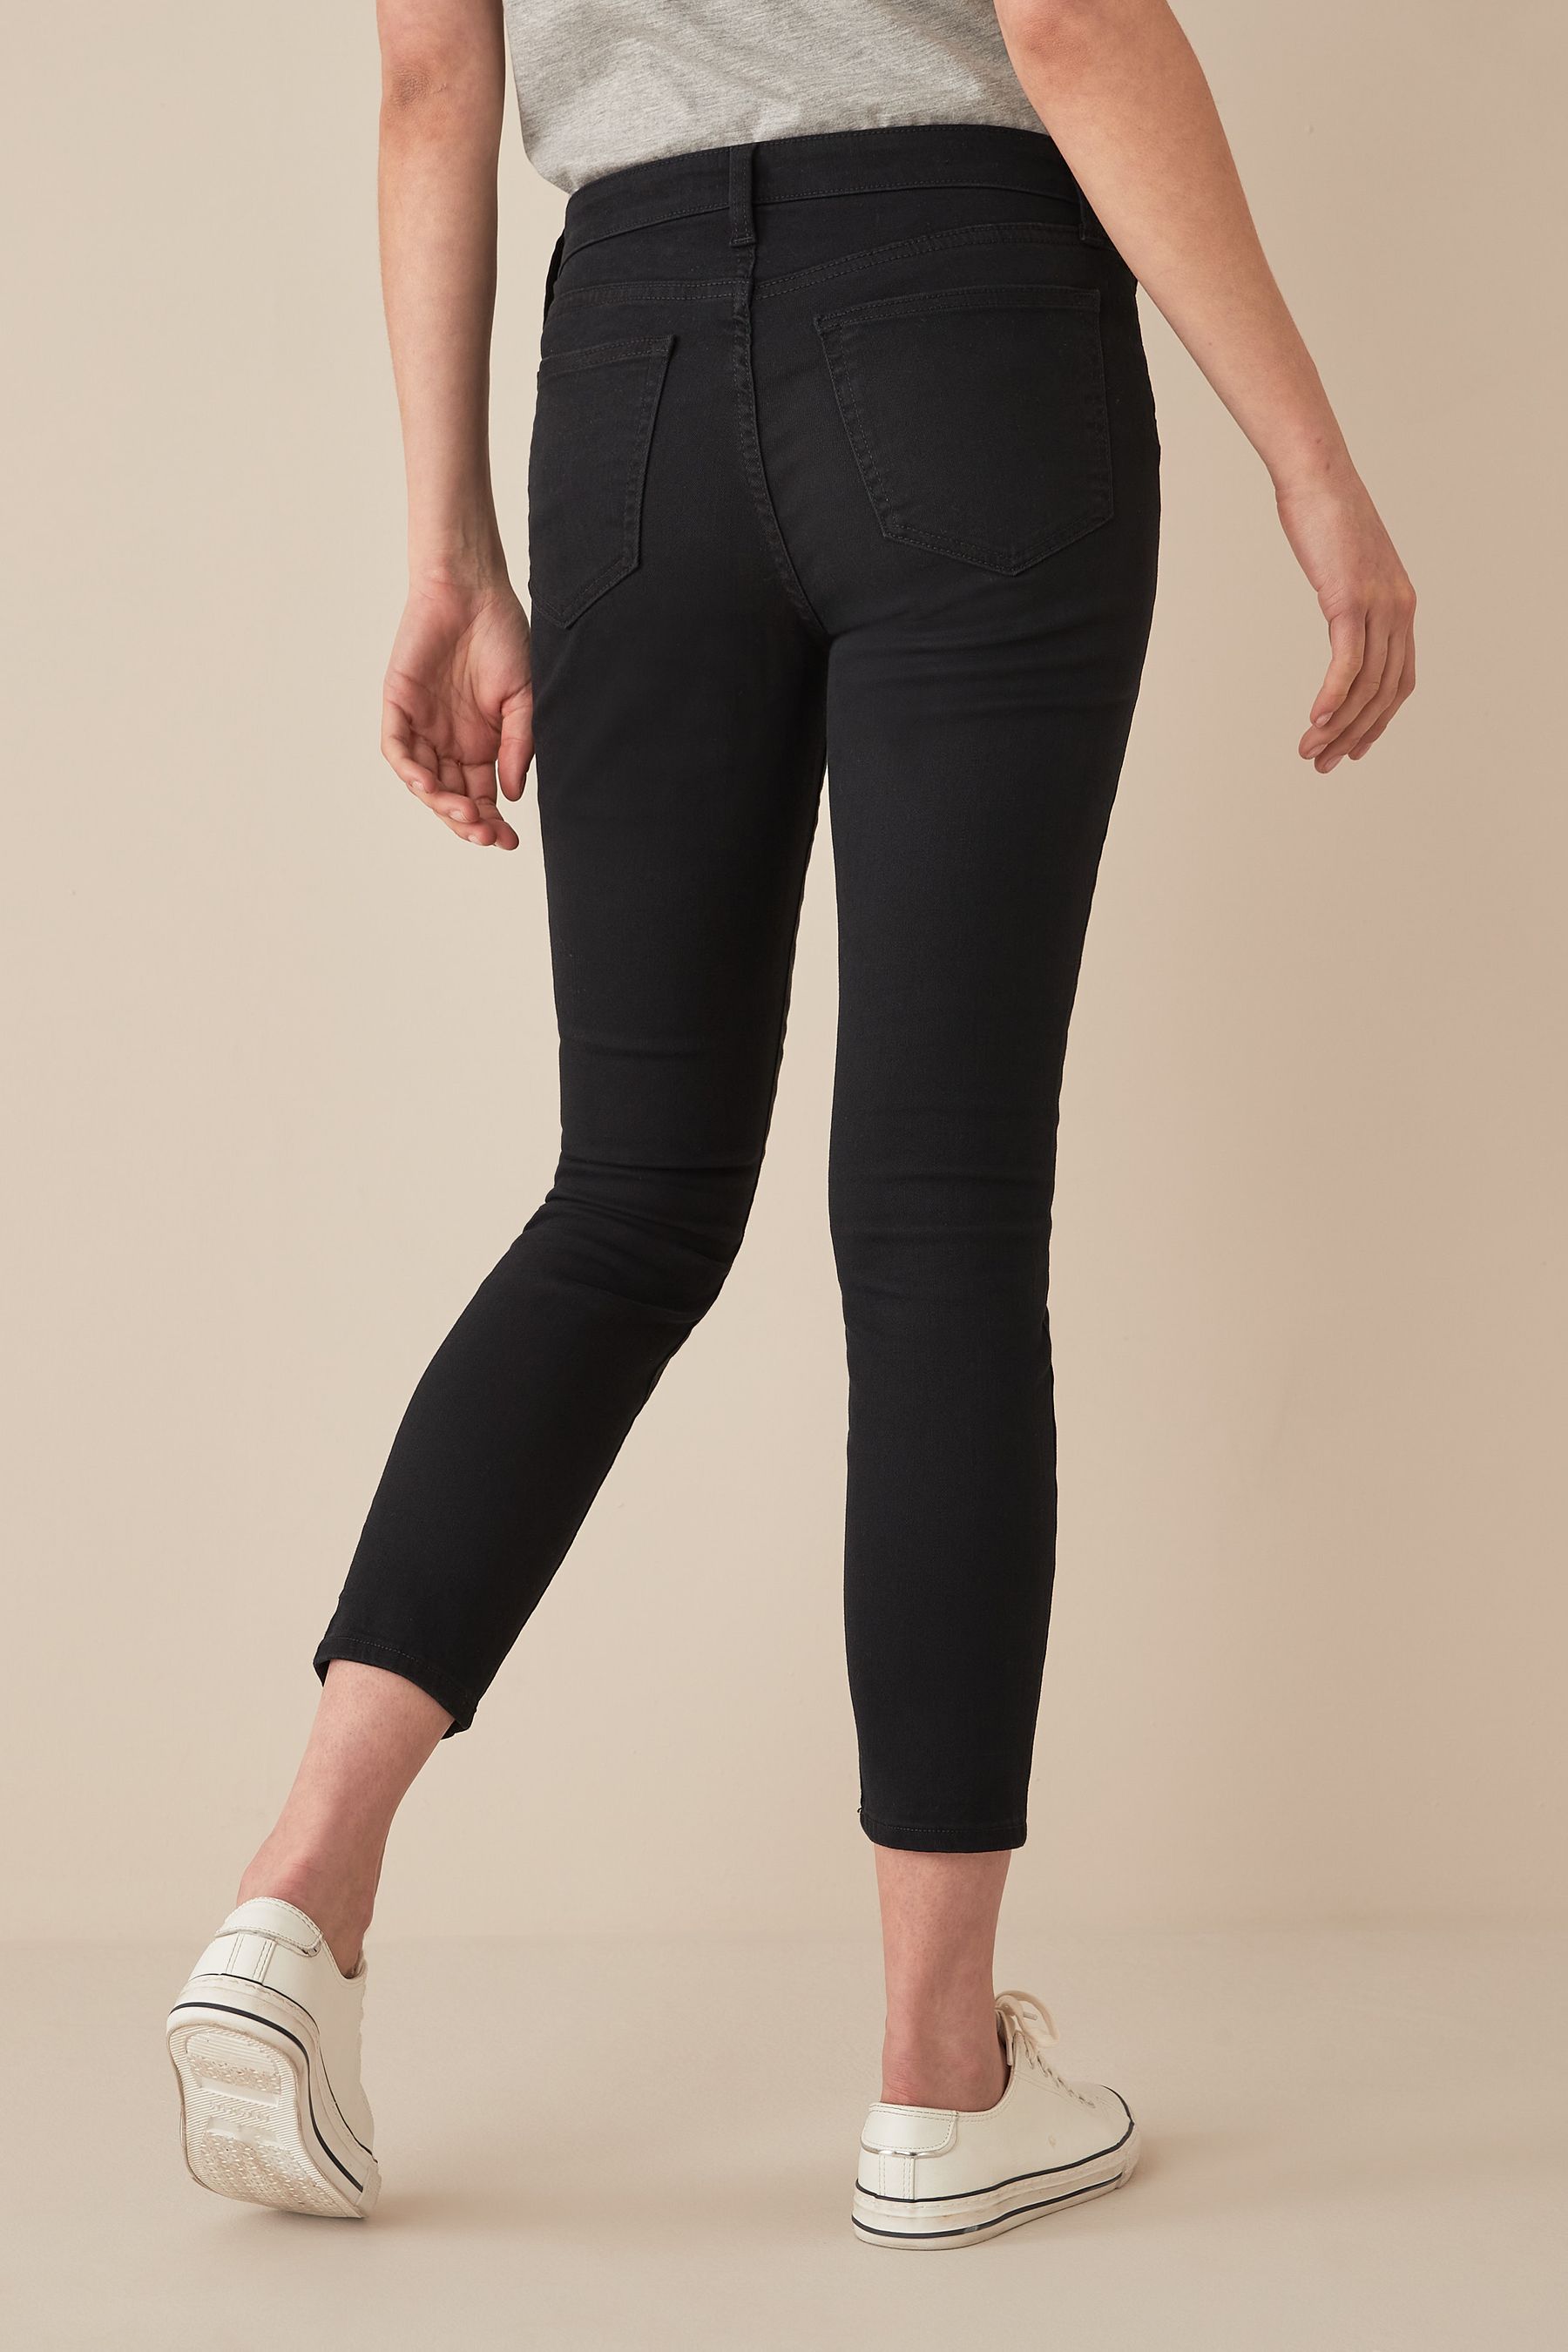 Buy Gap Mid Rise Favourite Ankle Jegging from the Gap online shop